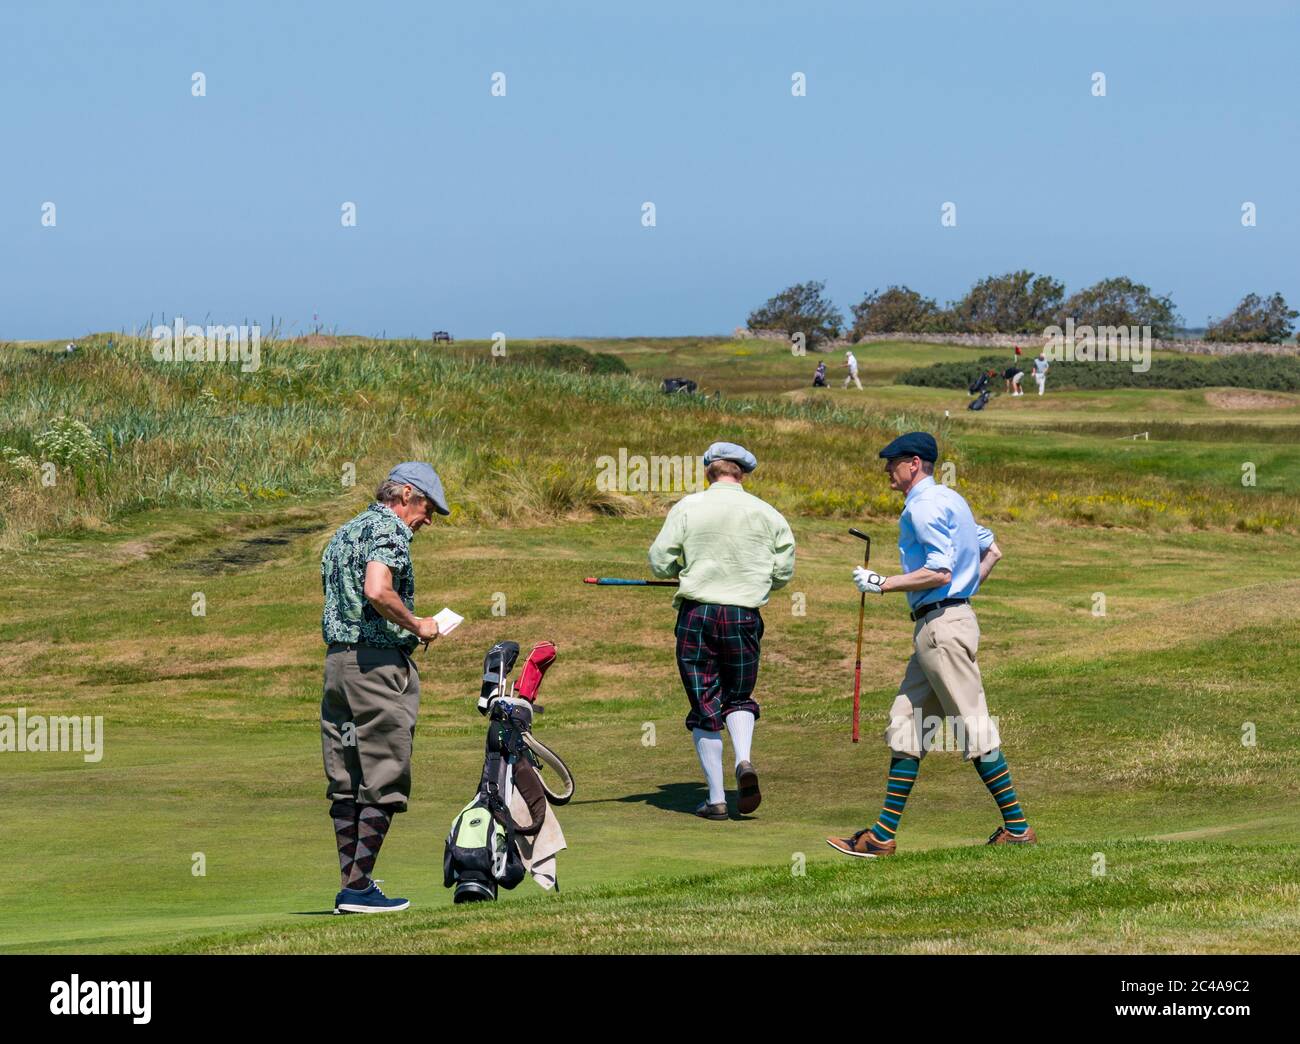 Aberlady, East Lothian, Scotland, United Kingdom, 25th June 2020. UK Weather: hot sunshine in Craigielaw golf course brings out men dressed in plus fours to play a round of golf Stock Photo